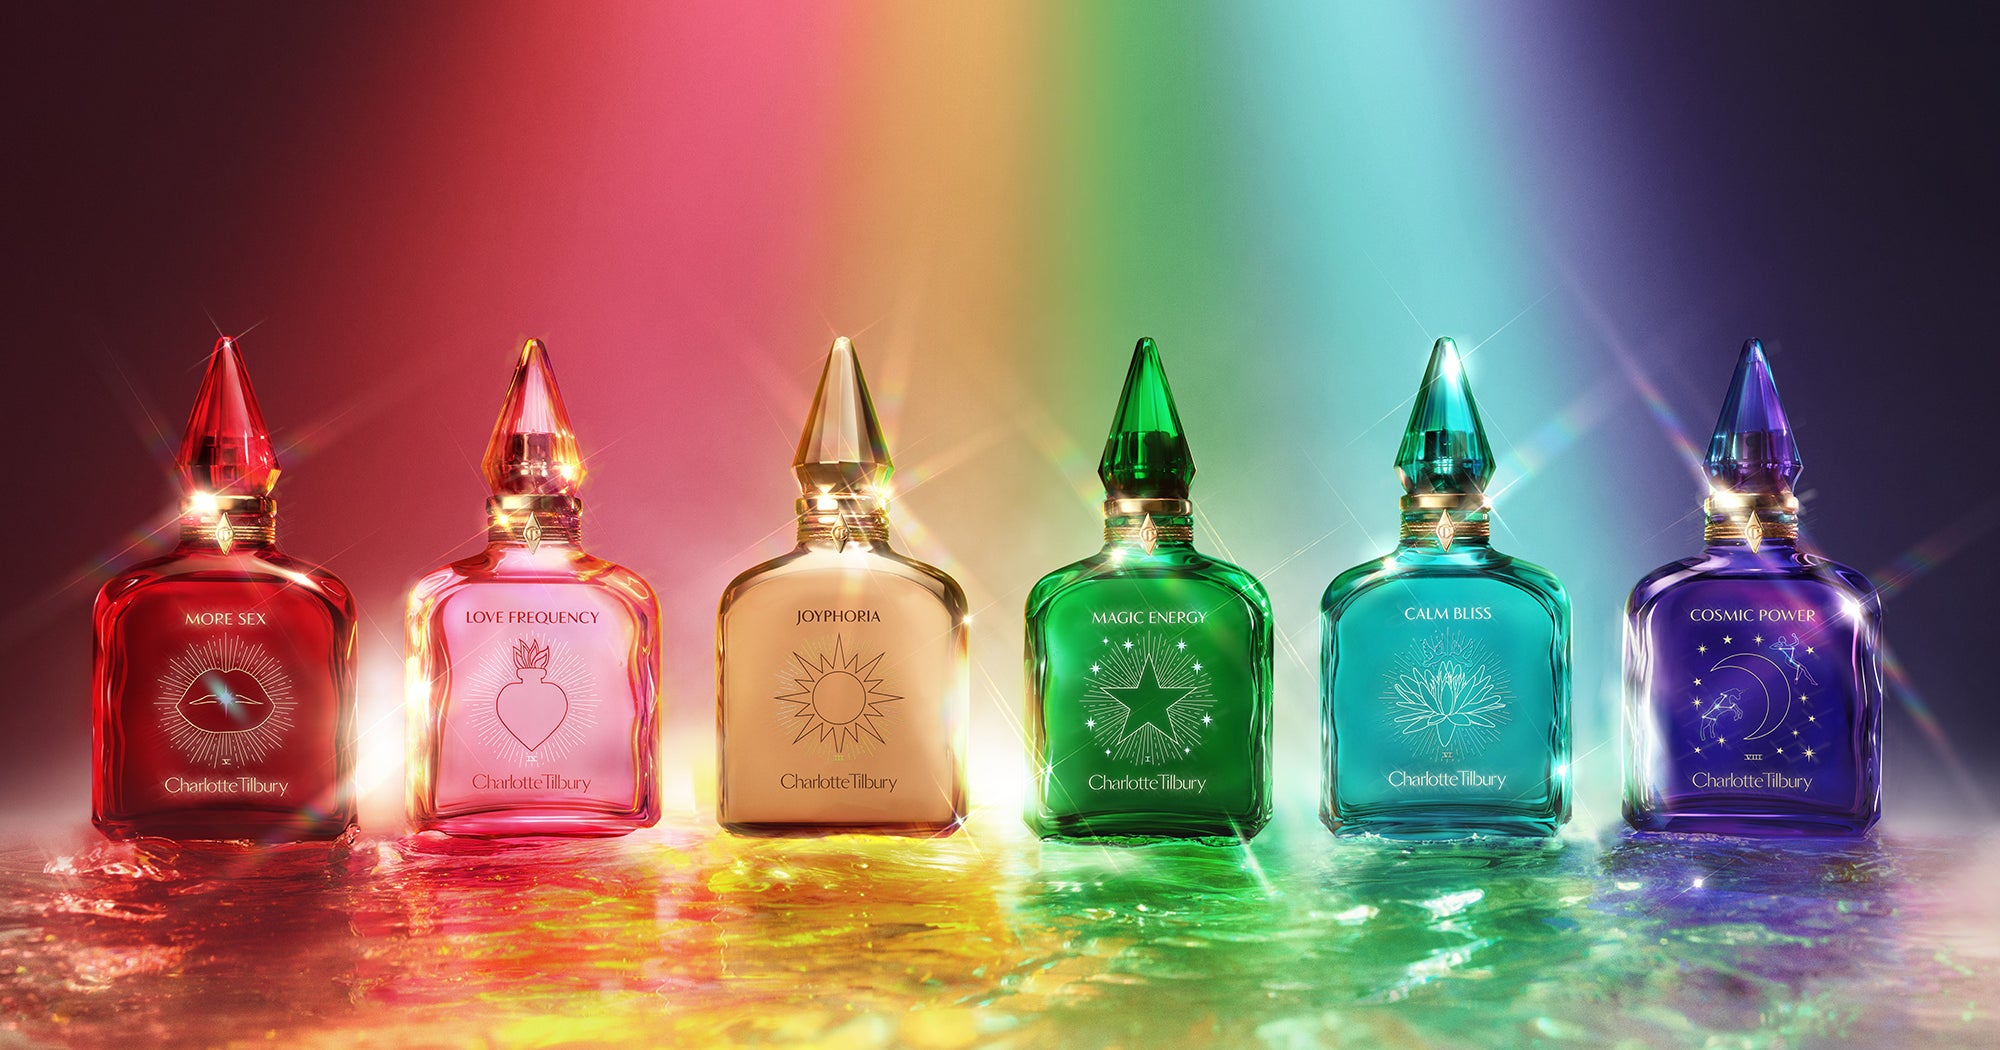 Charlotte Tilbury’s New Perfumes Can Help You Manifest Your Dreams